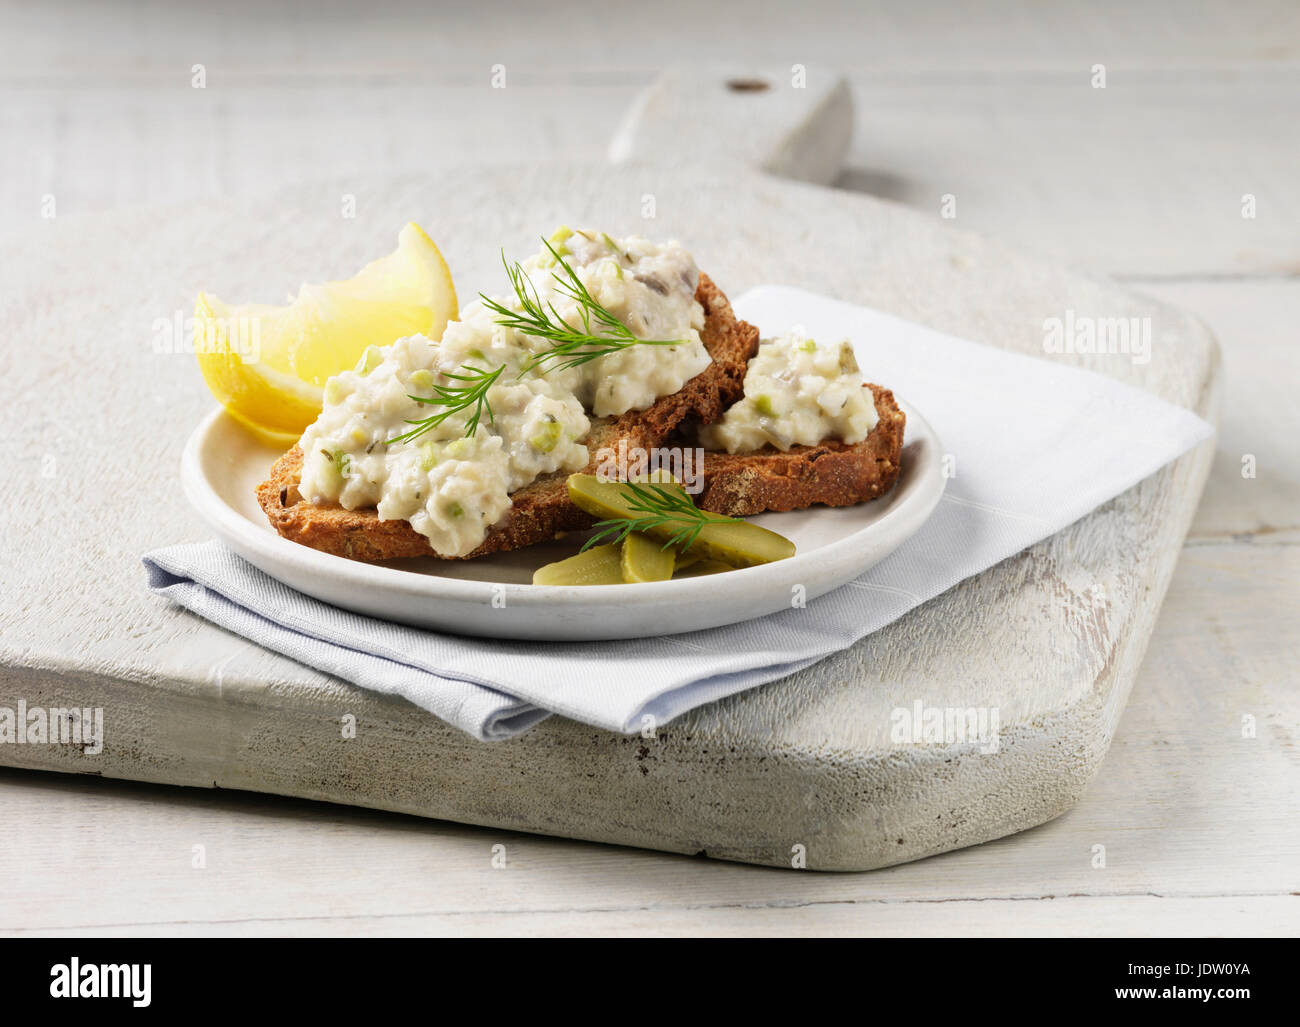 Plate of toast with herring and lemon Stock Photo